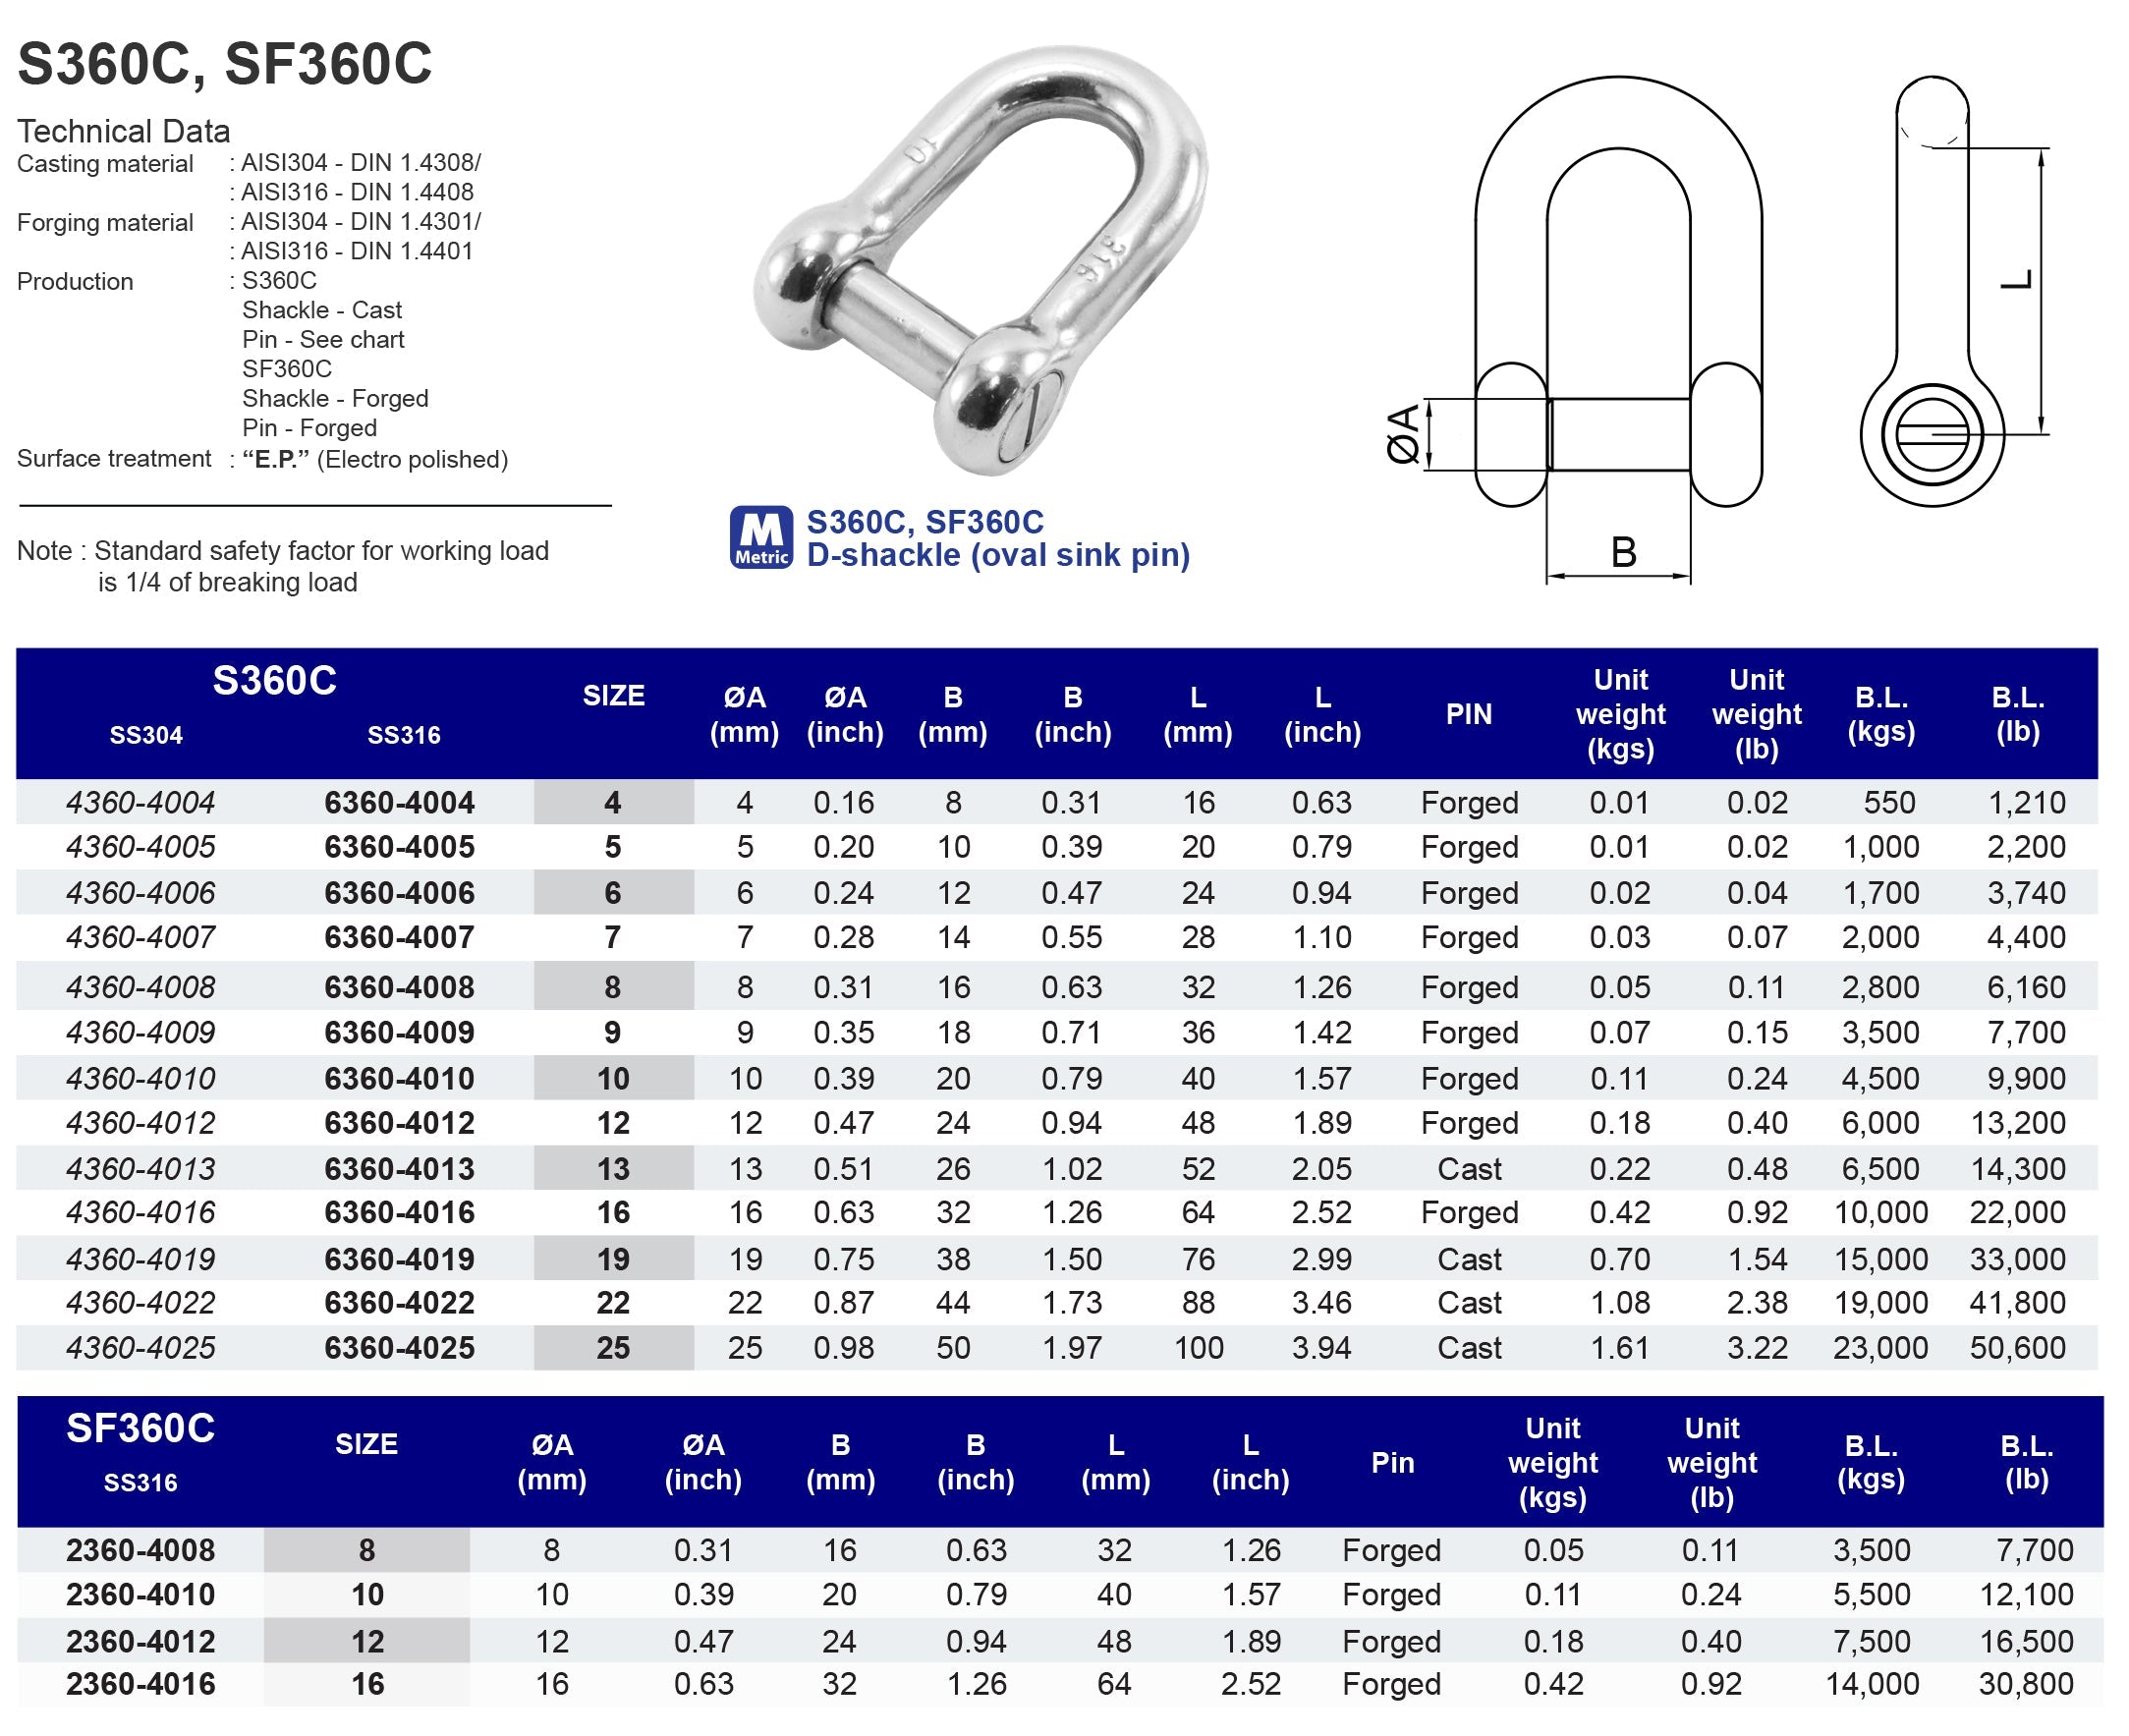 SF360C D-shackle (oval sink pin) - 316